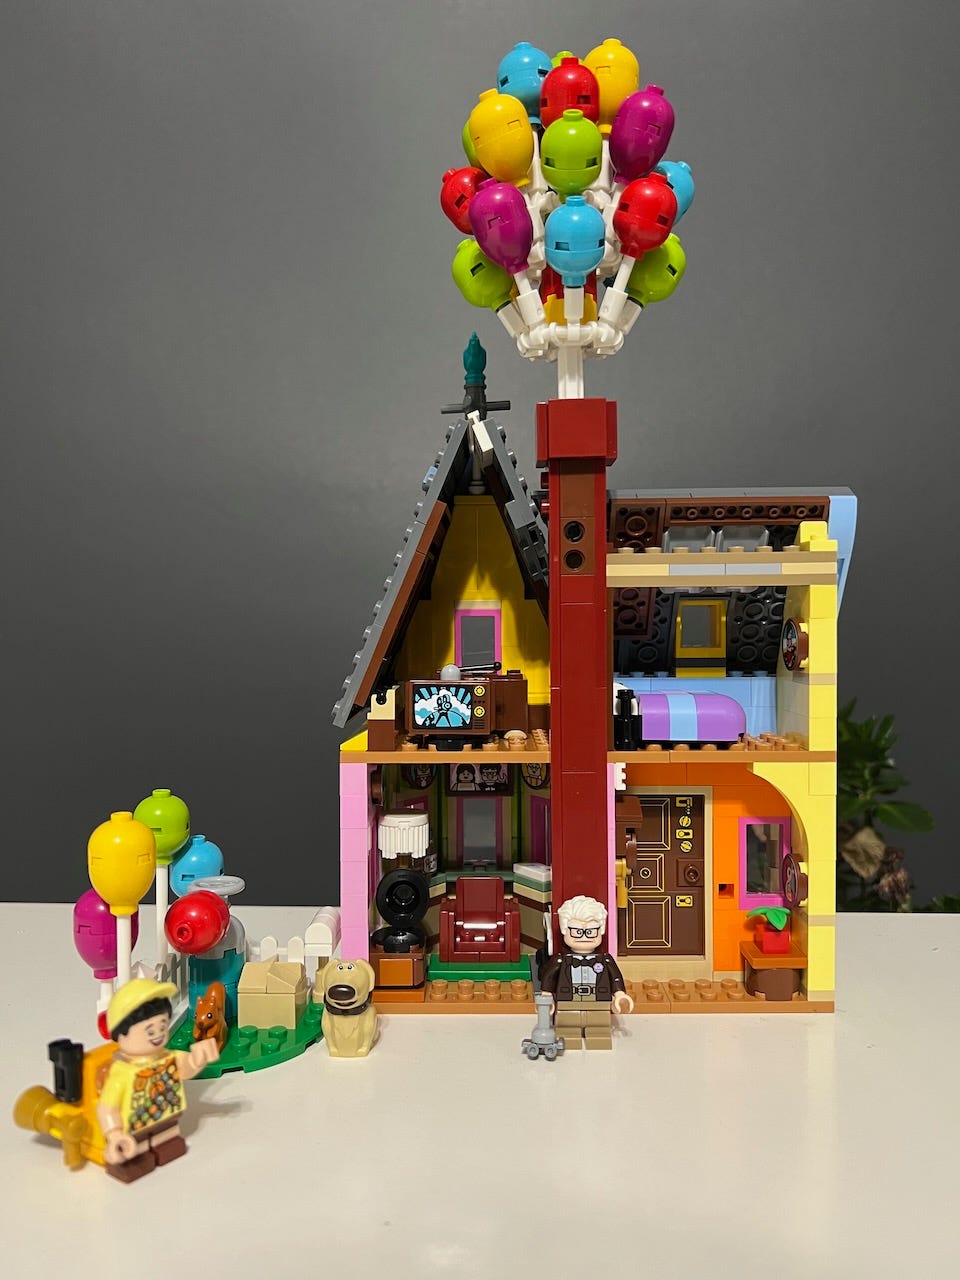 LEGO's Up House Is Both Charming And Affordable, by Attila Vágó, Bricks  n' Brackets